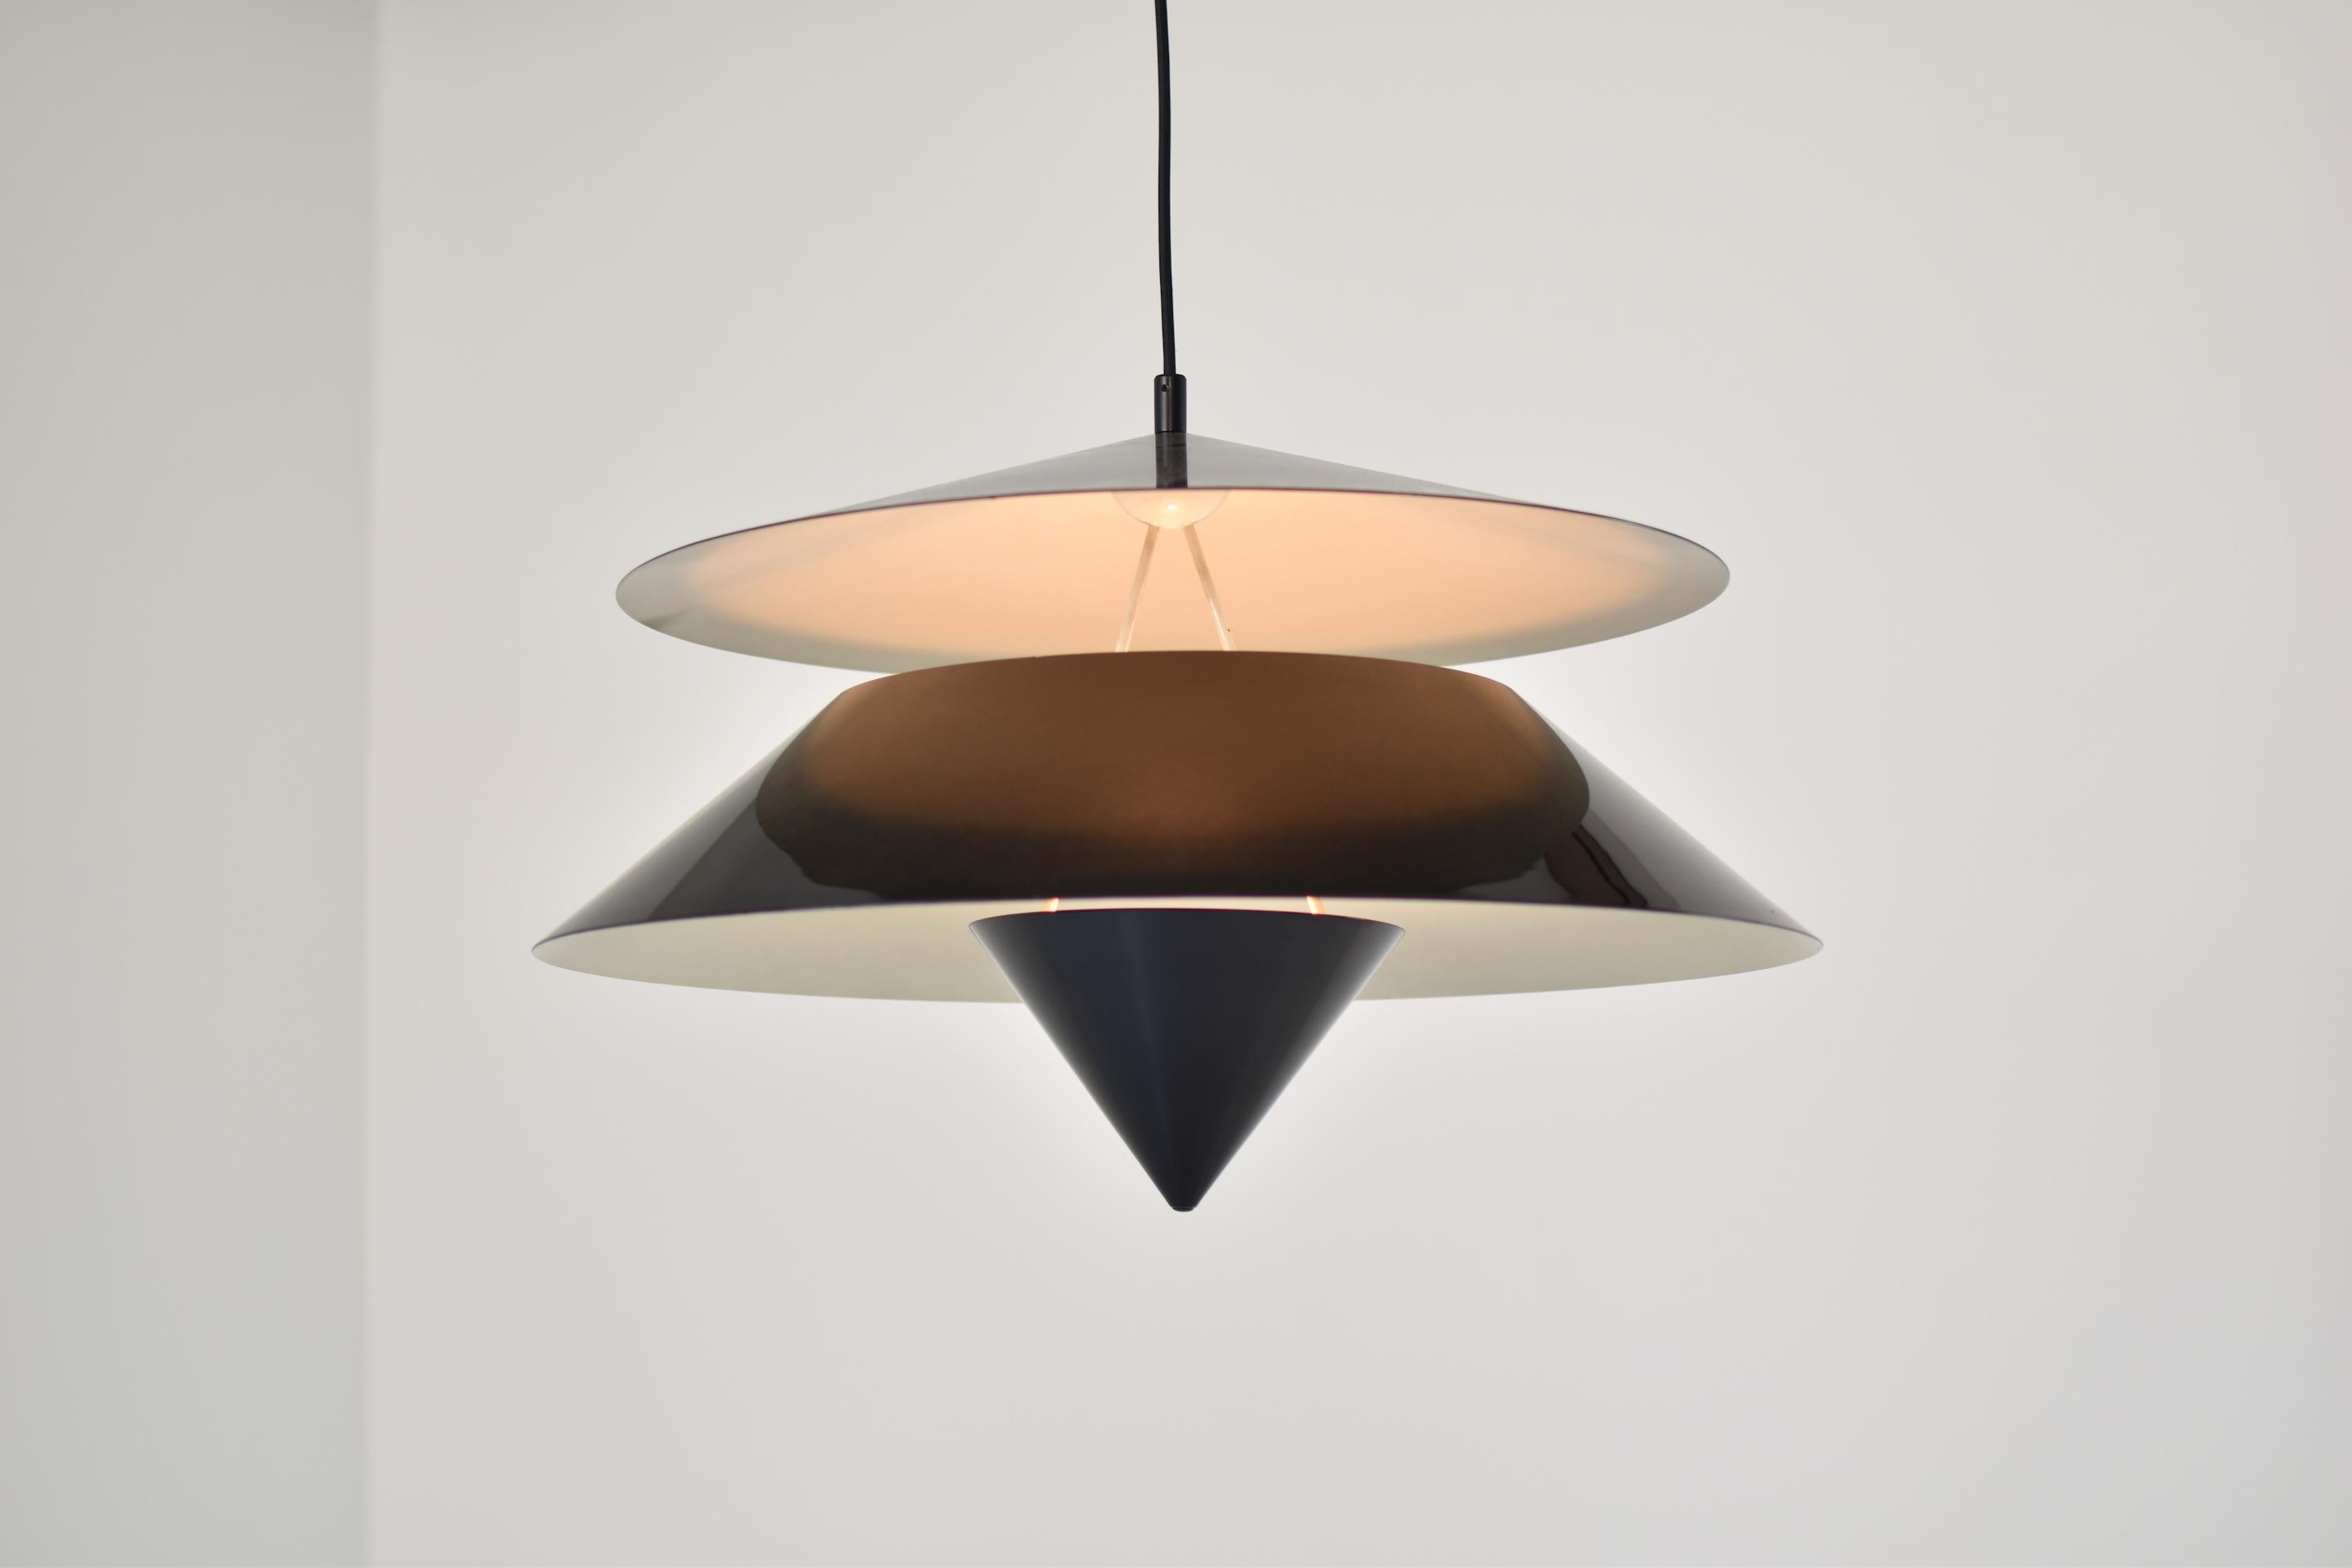 Rare ‘Akaari’ pendant by Vico Magistretti for Oluce, Italy, 1950s. This Modernist pendant is made out of black lacquered aluminum and metal. Provides uplight and downlight. Original canopy. Labeled!